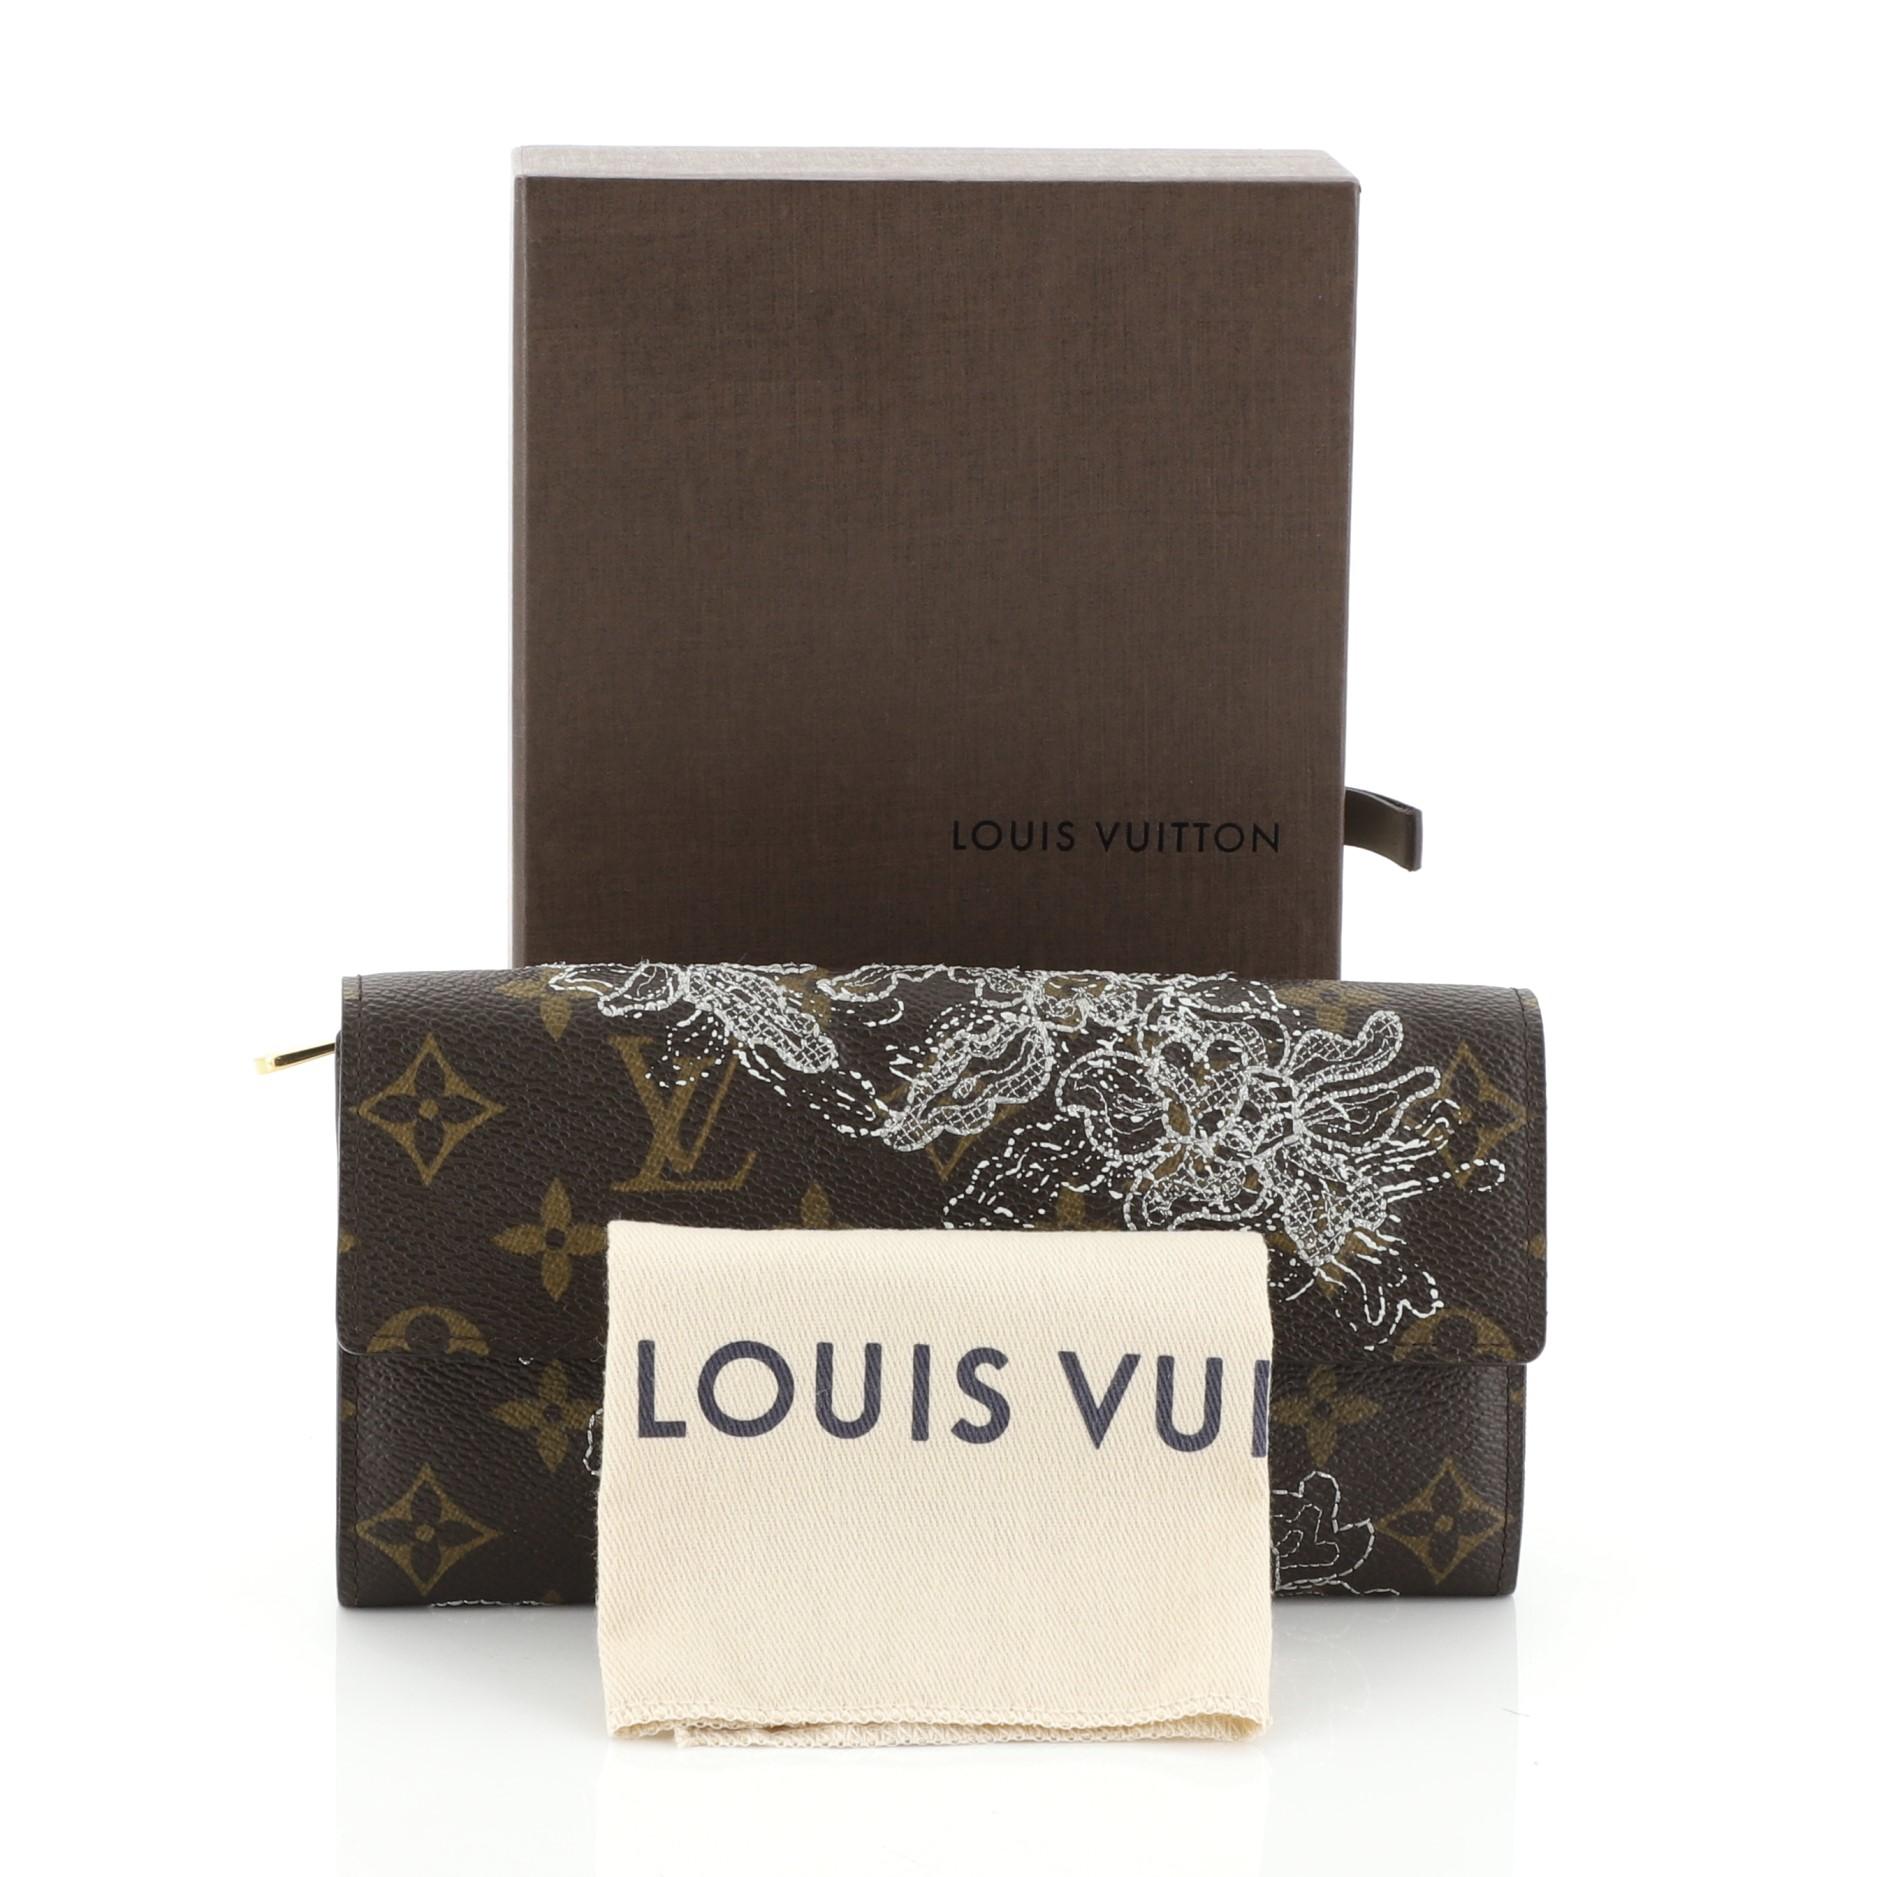 This Louis Vuitton Sarah Wallet Limited Edition Monogram Dentelle, crafted in brown monogram coated canvas, features delicate lurex lace embroidery and gold-tone hardware. Its snap button closure opens to a neutral leather interior with multiple